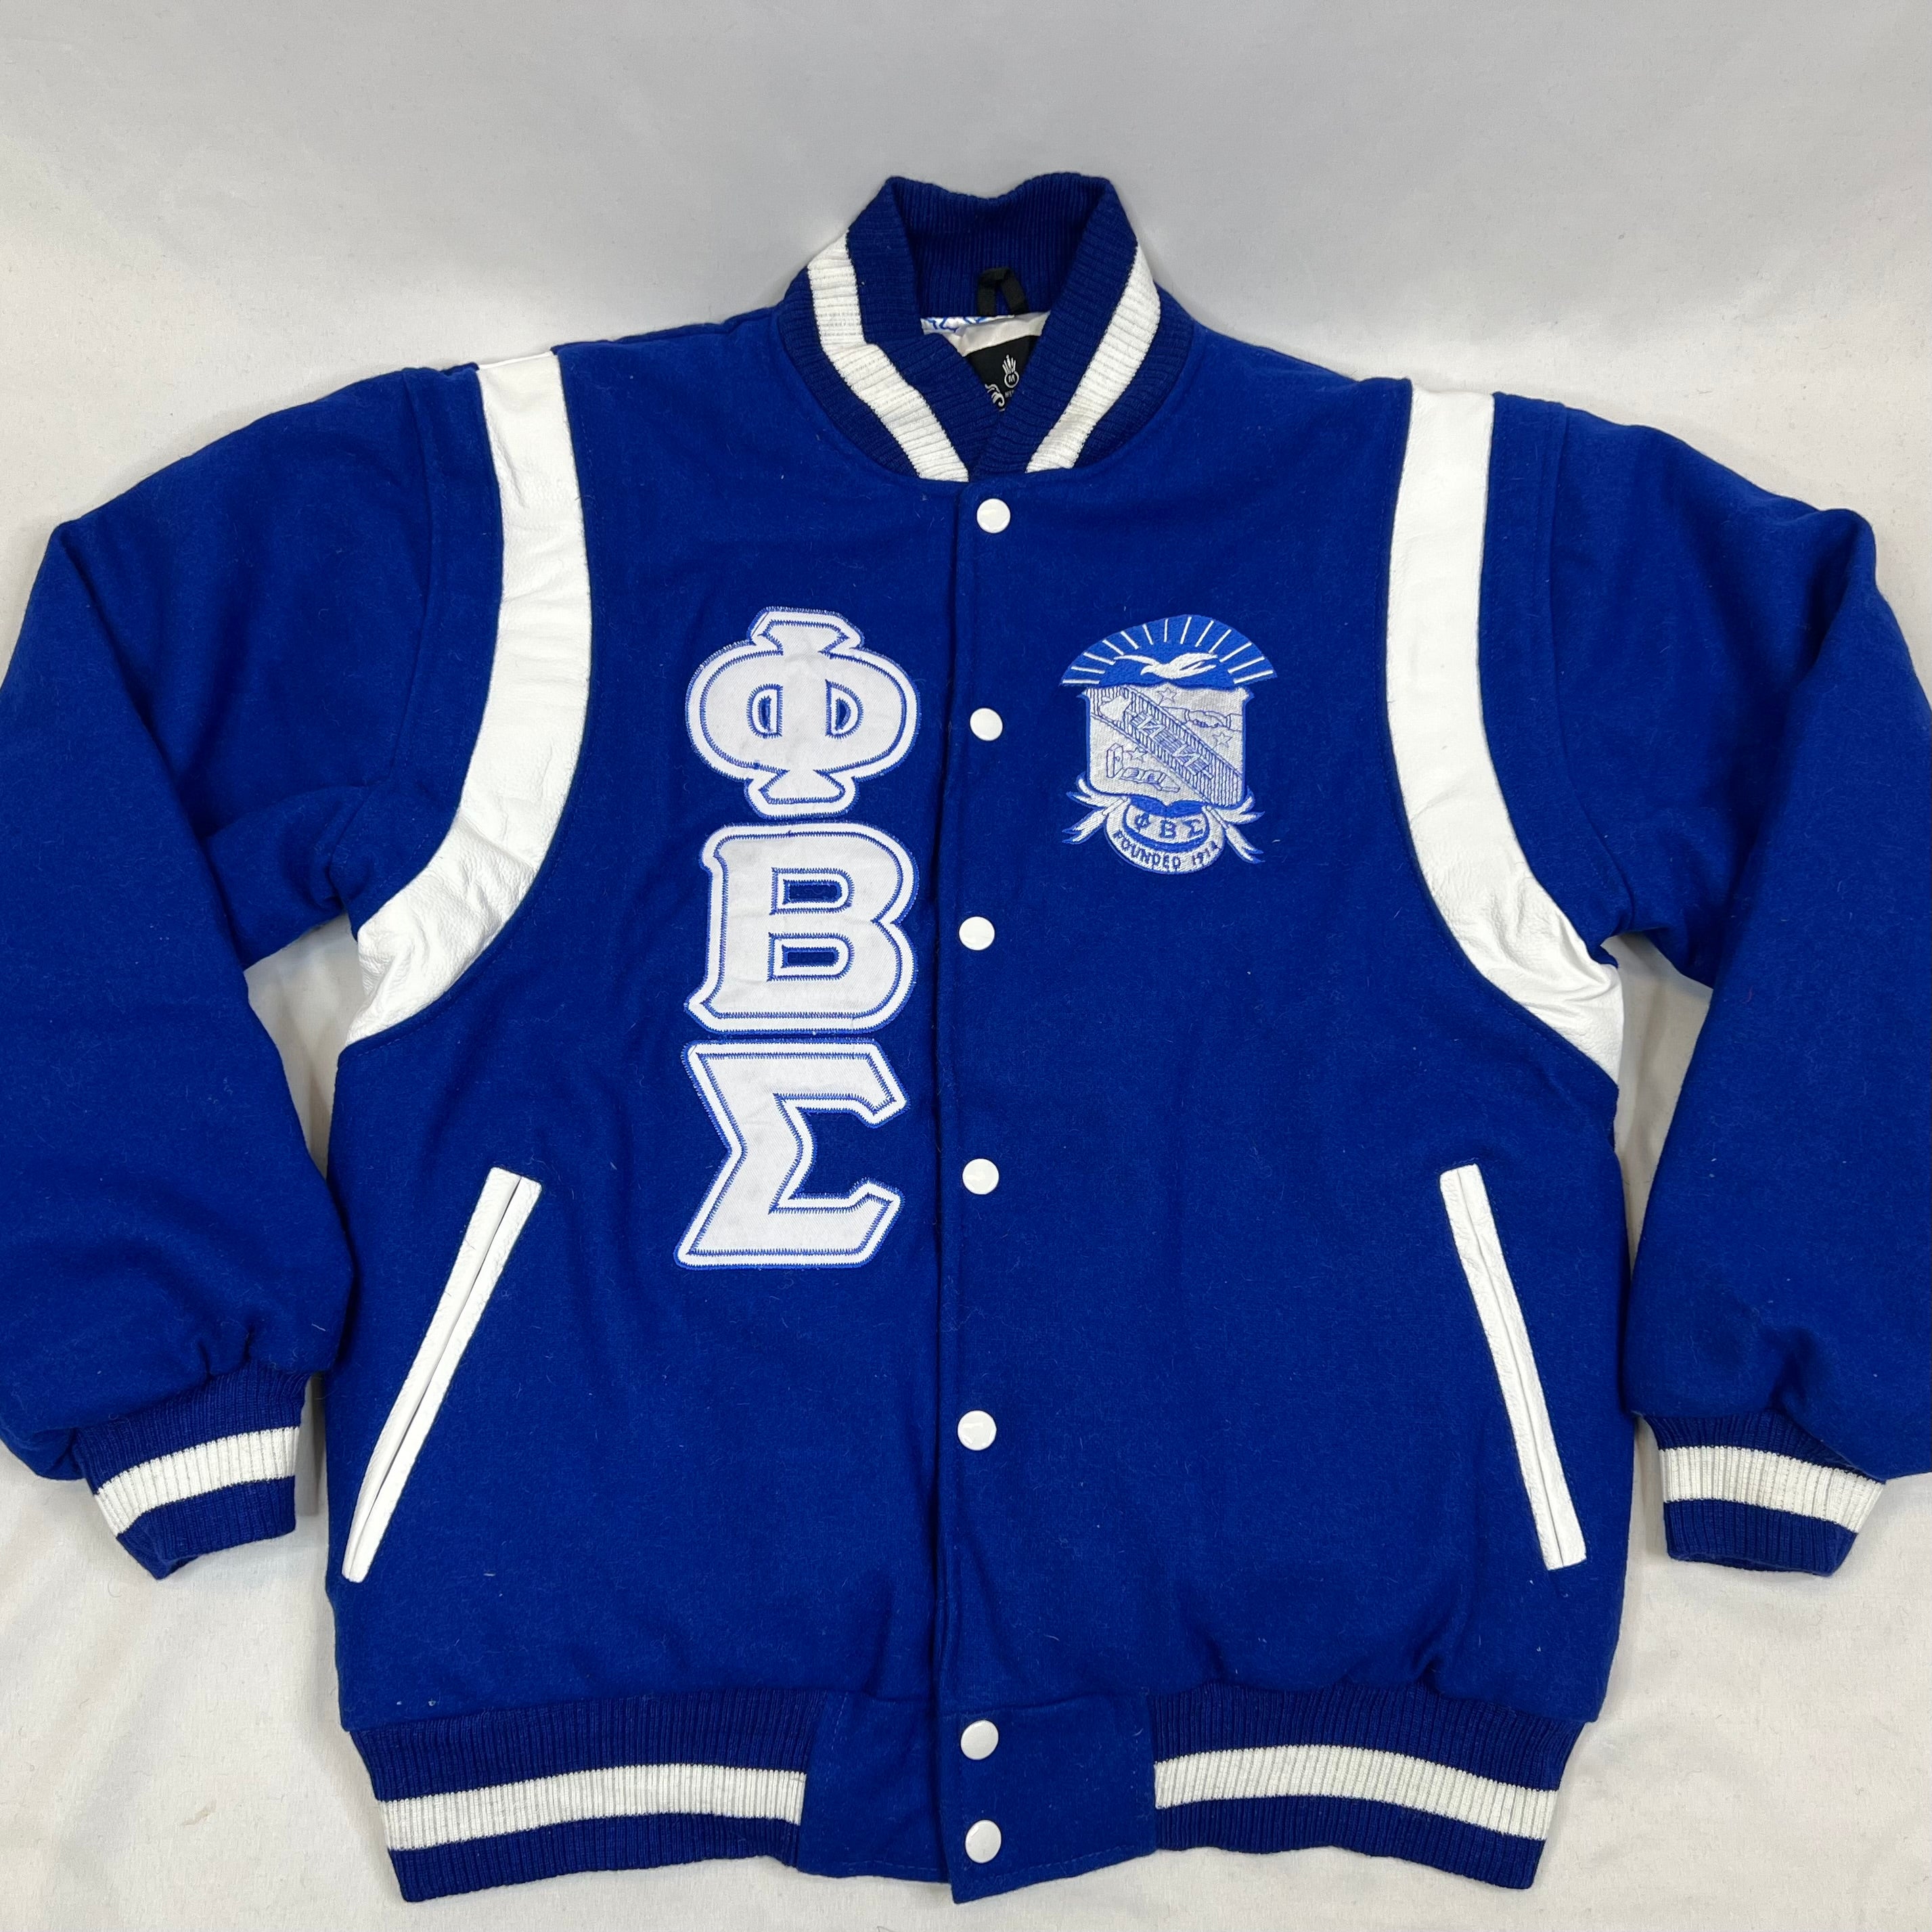 Sigma Wool And Leather Letterman Jacket – The King McNeal Collection